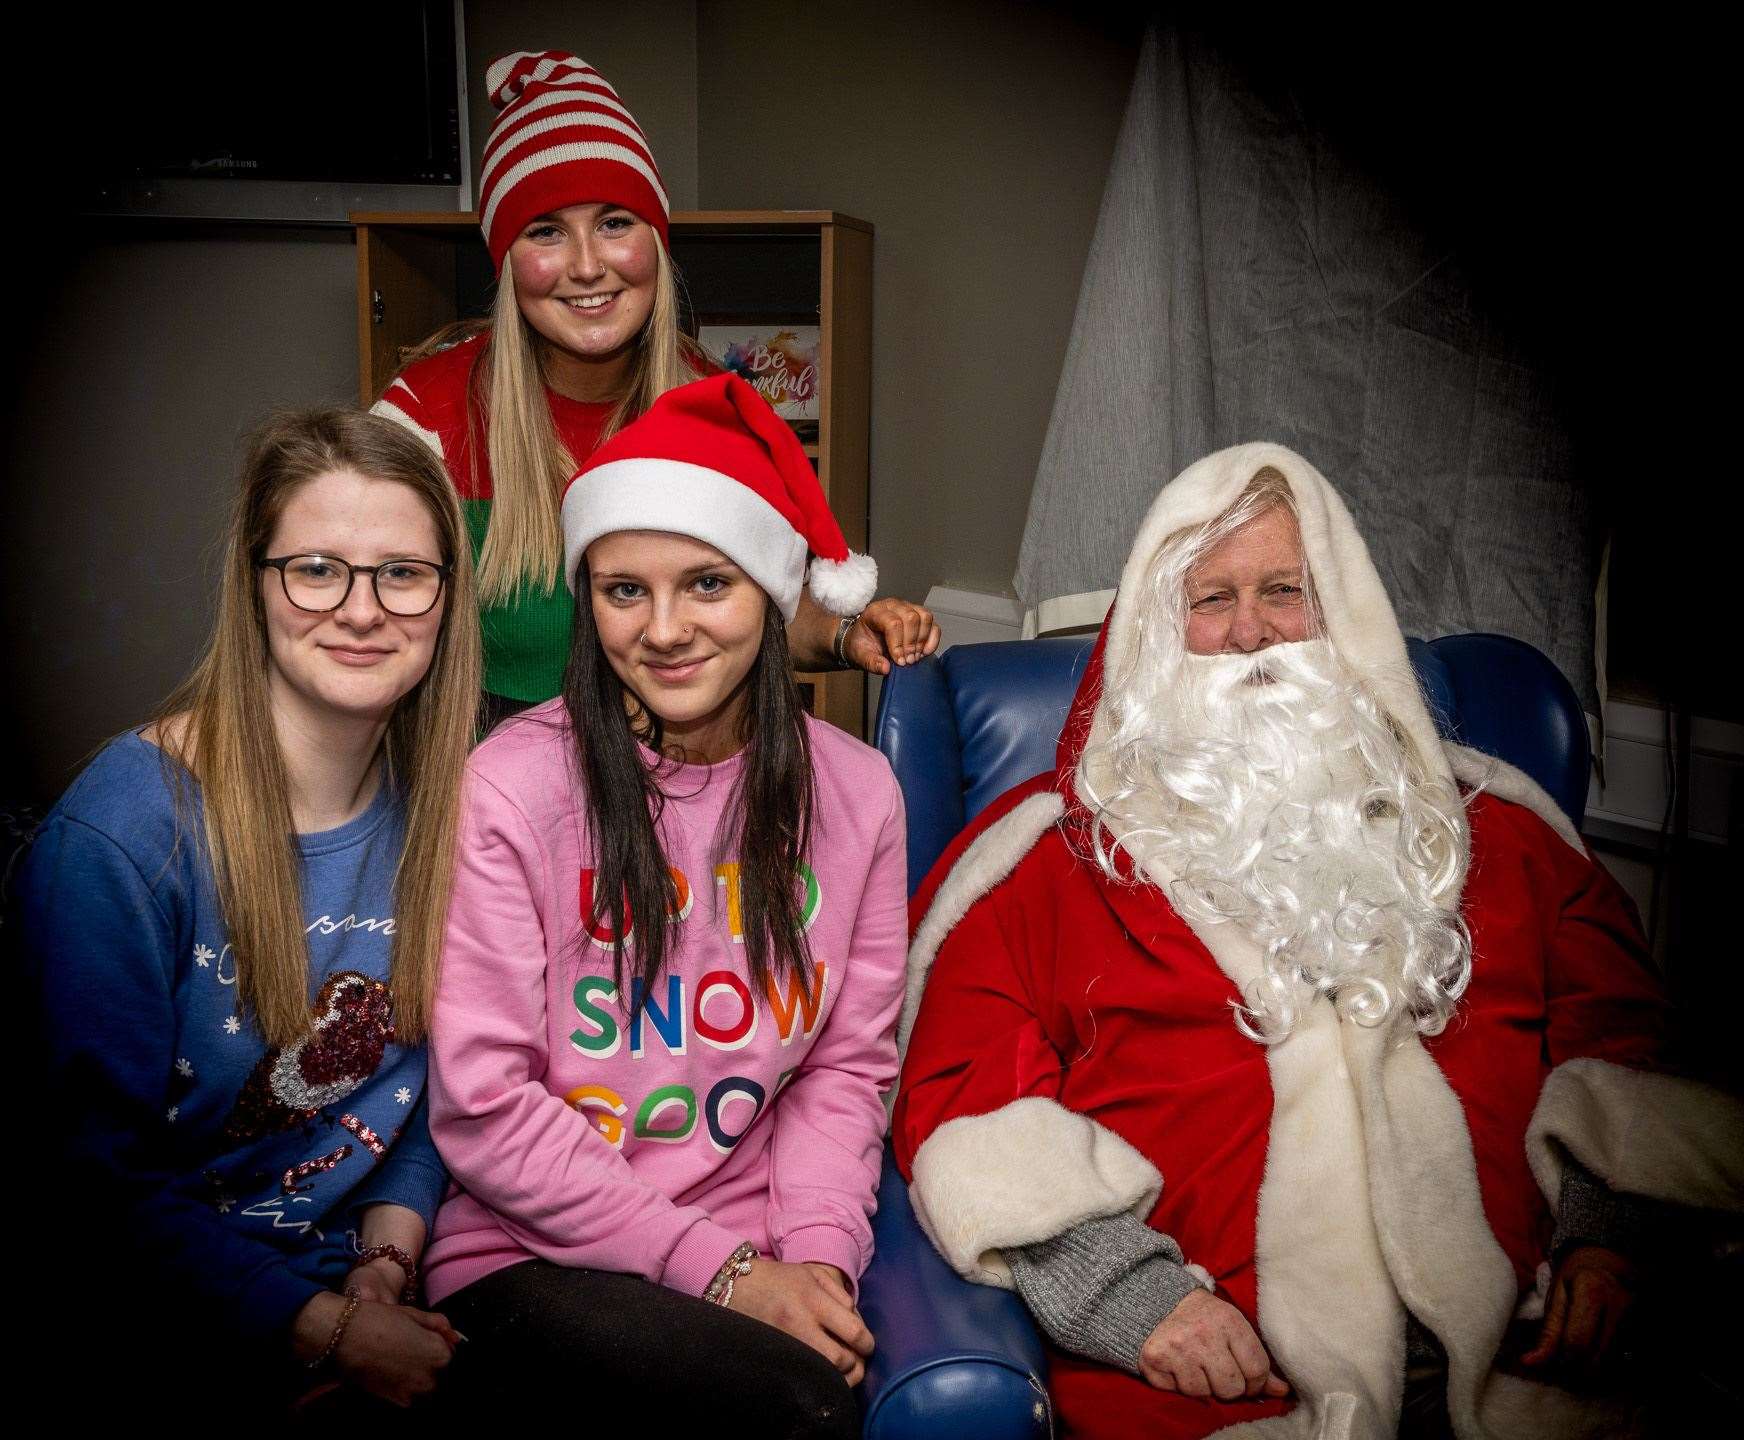 Santa was in his grotto at Dornoch Academy on Saturday afternoon and was helped by Katie O'Donnell, Lucy MacLennan and Emma Sutherland. Picture: Andy Kirby